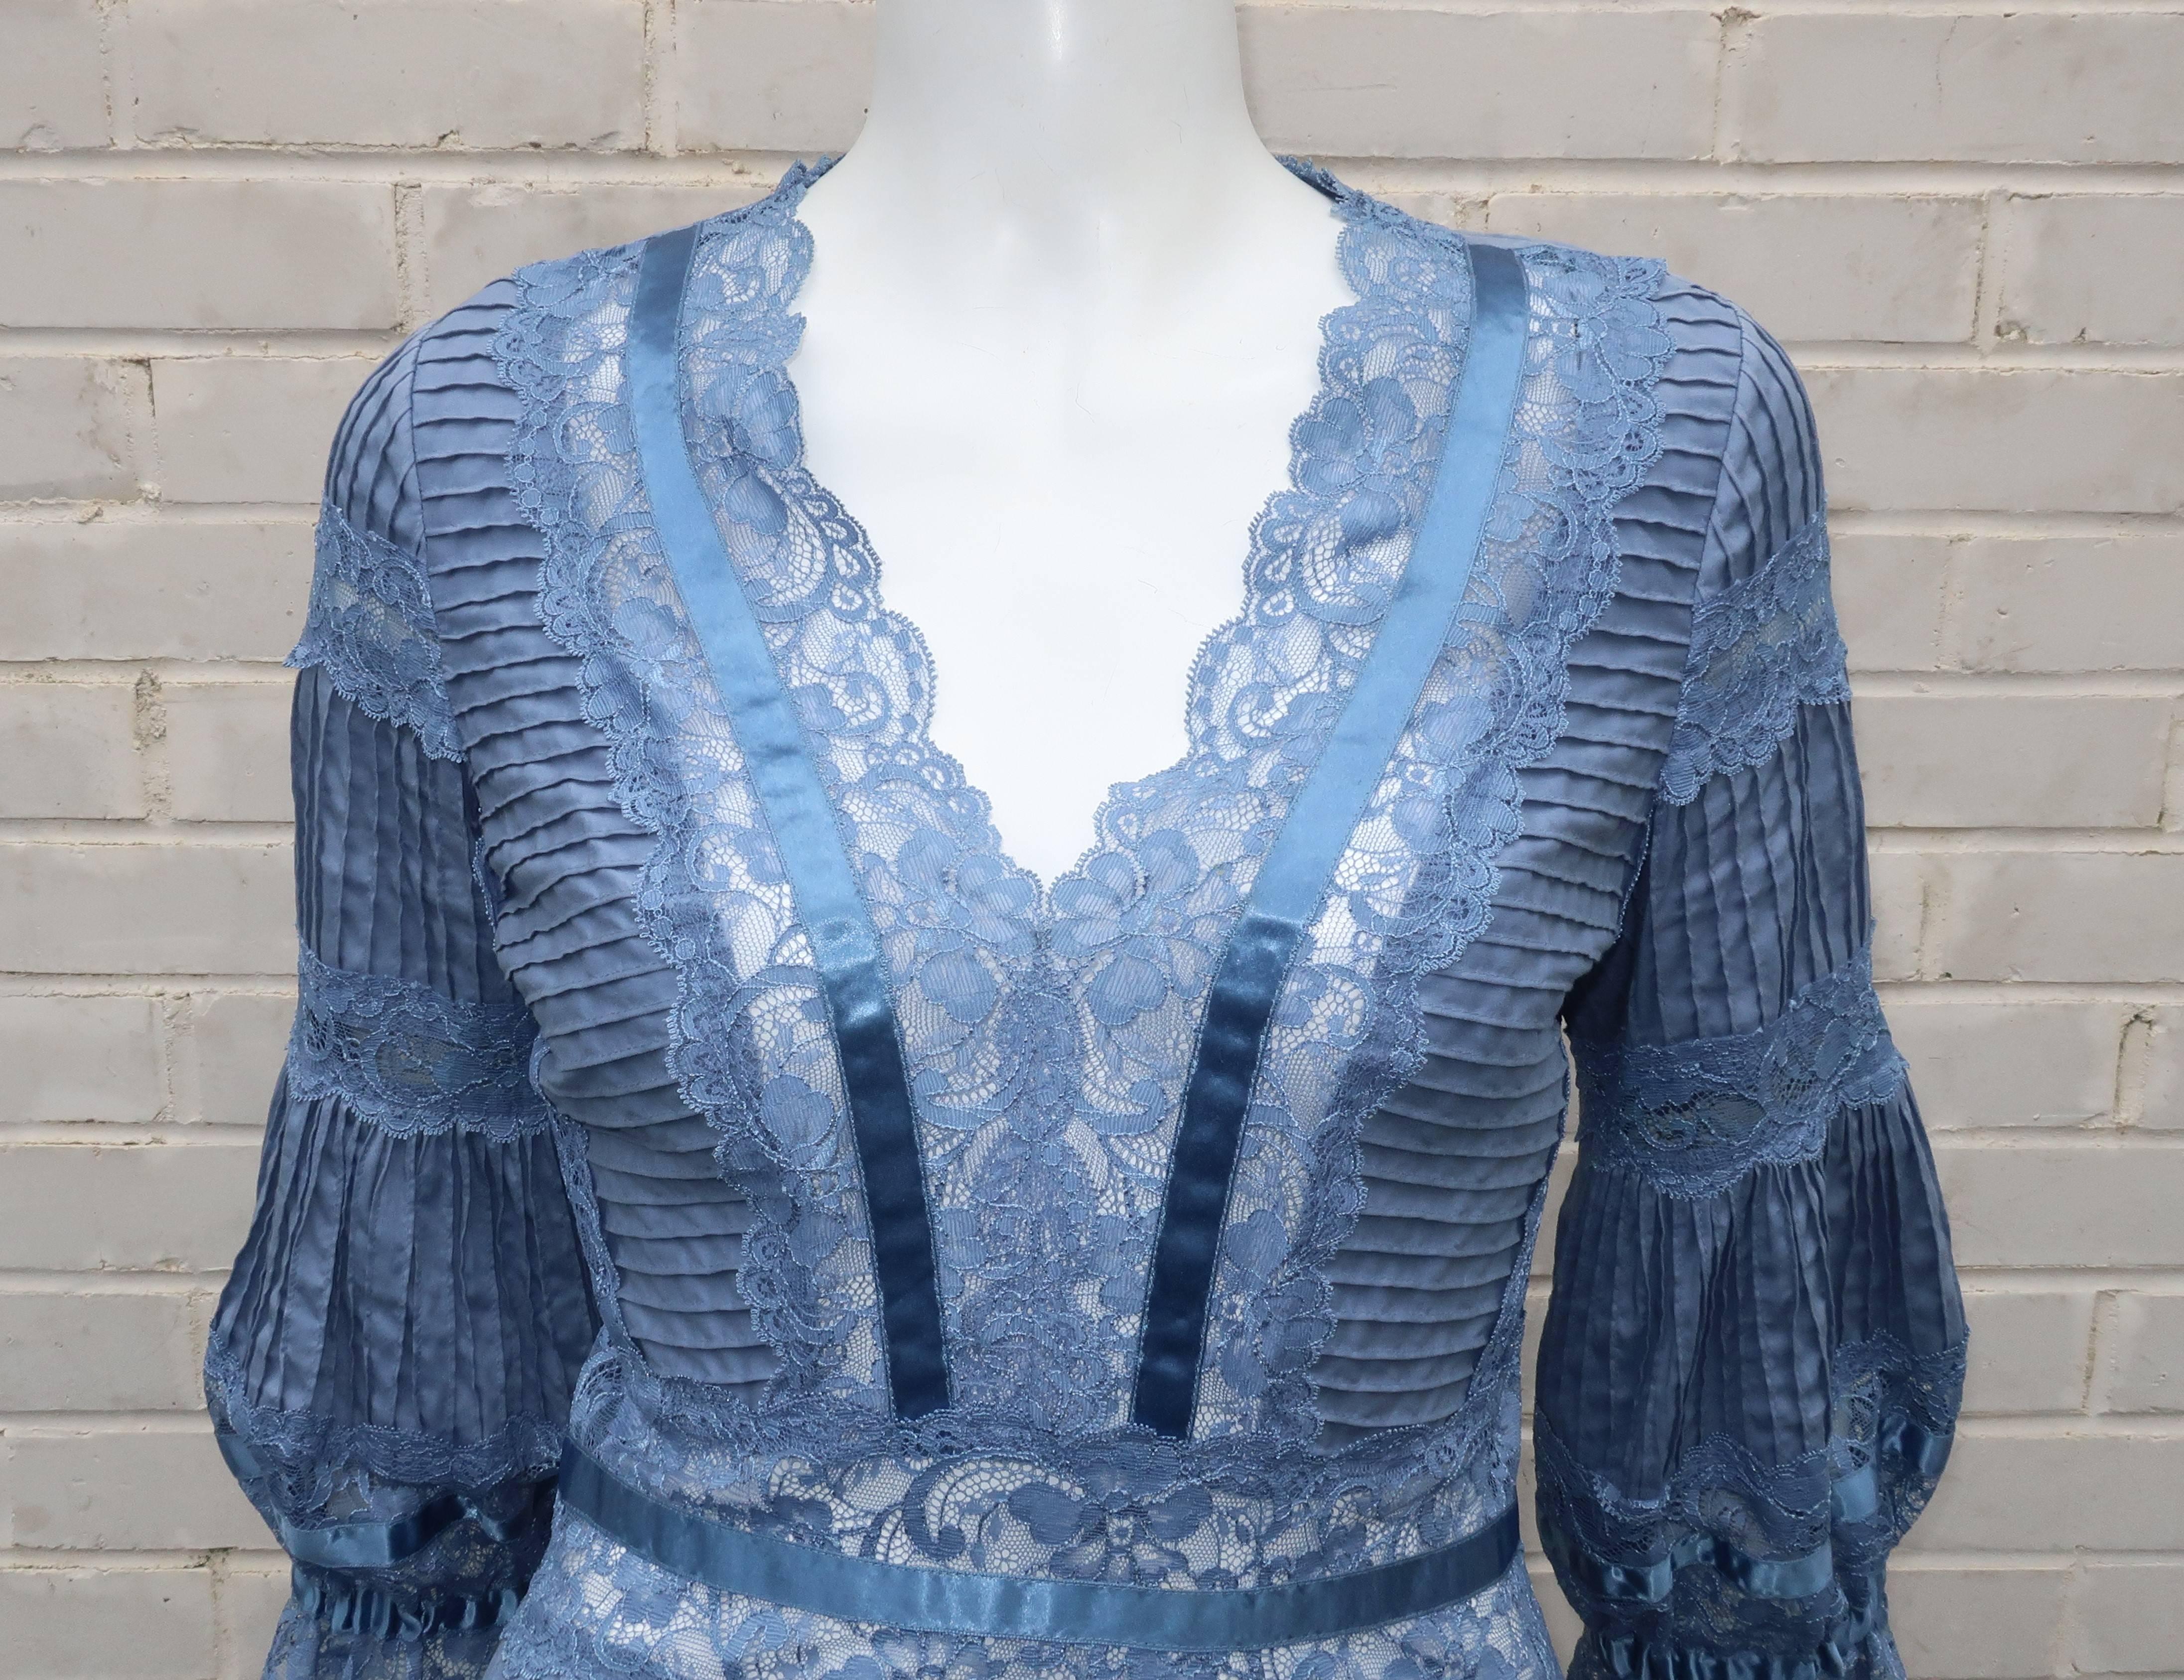 Catherine Malandrino expertly mixes romanticism with feminine silhouettes that are as complimentary to the wearer as to the design.  This pale periwinkle blue cotton top is beautifully detailed with coordinating lace inserts, satin ribbon trim,